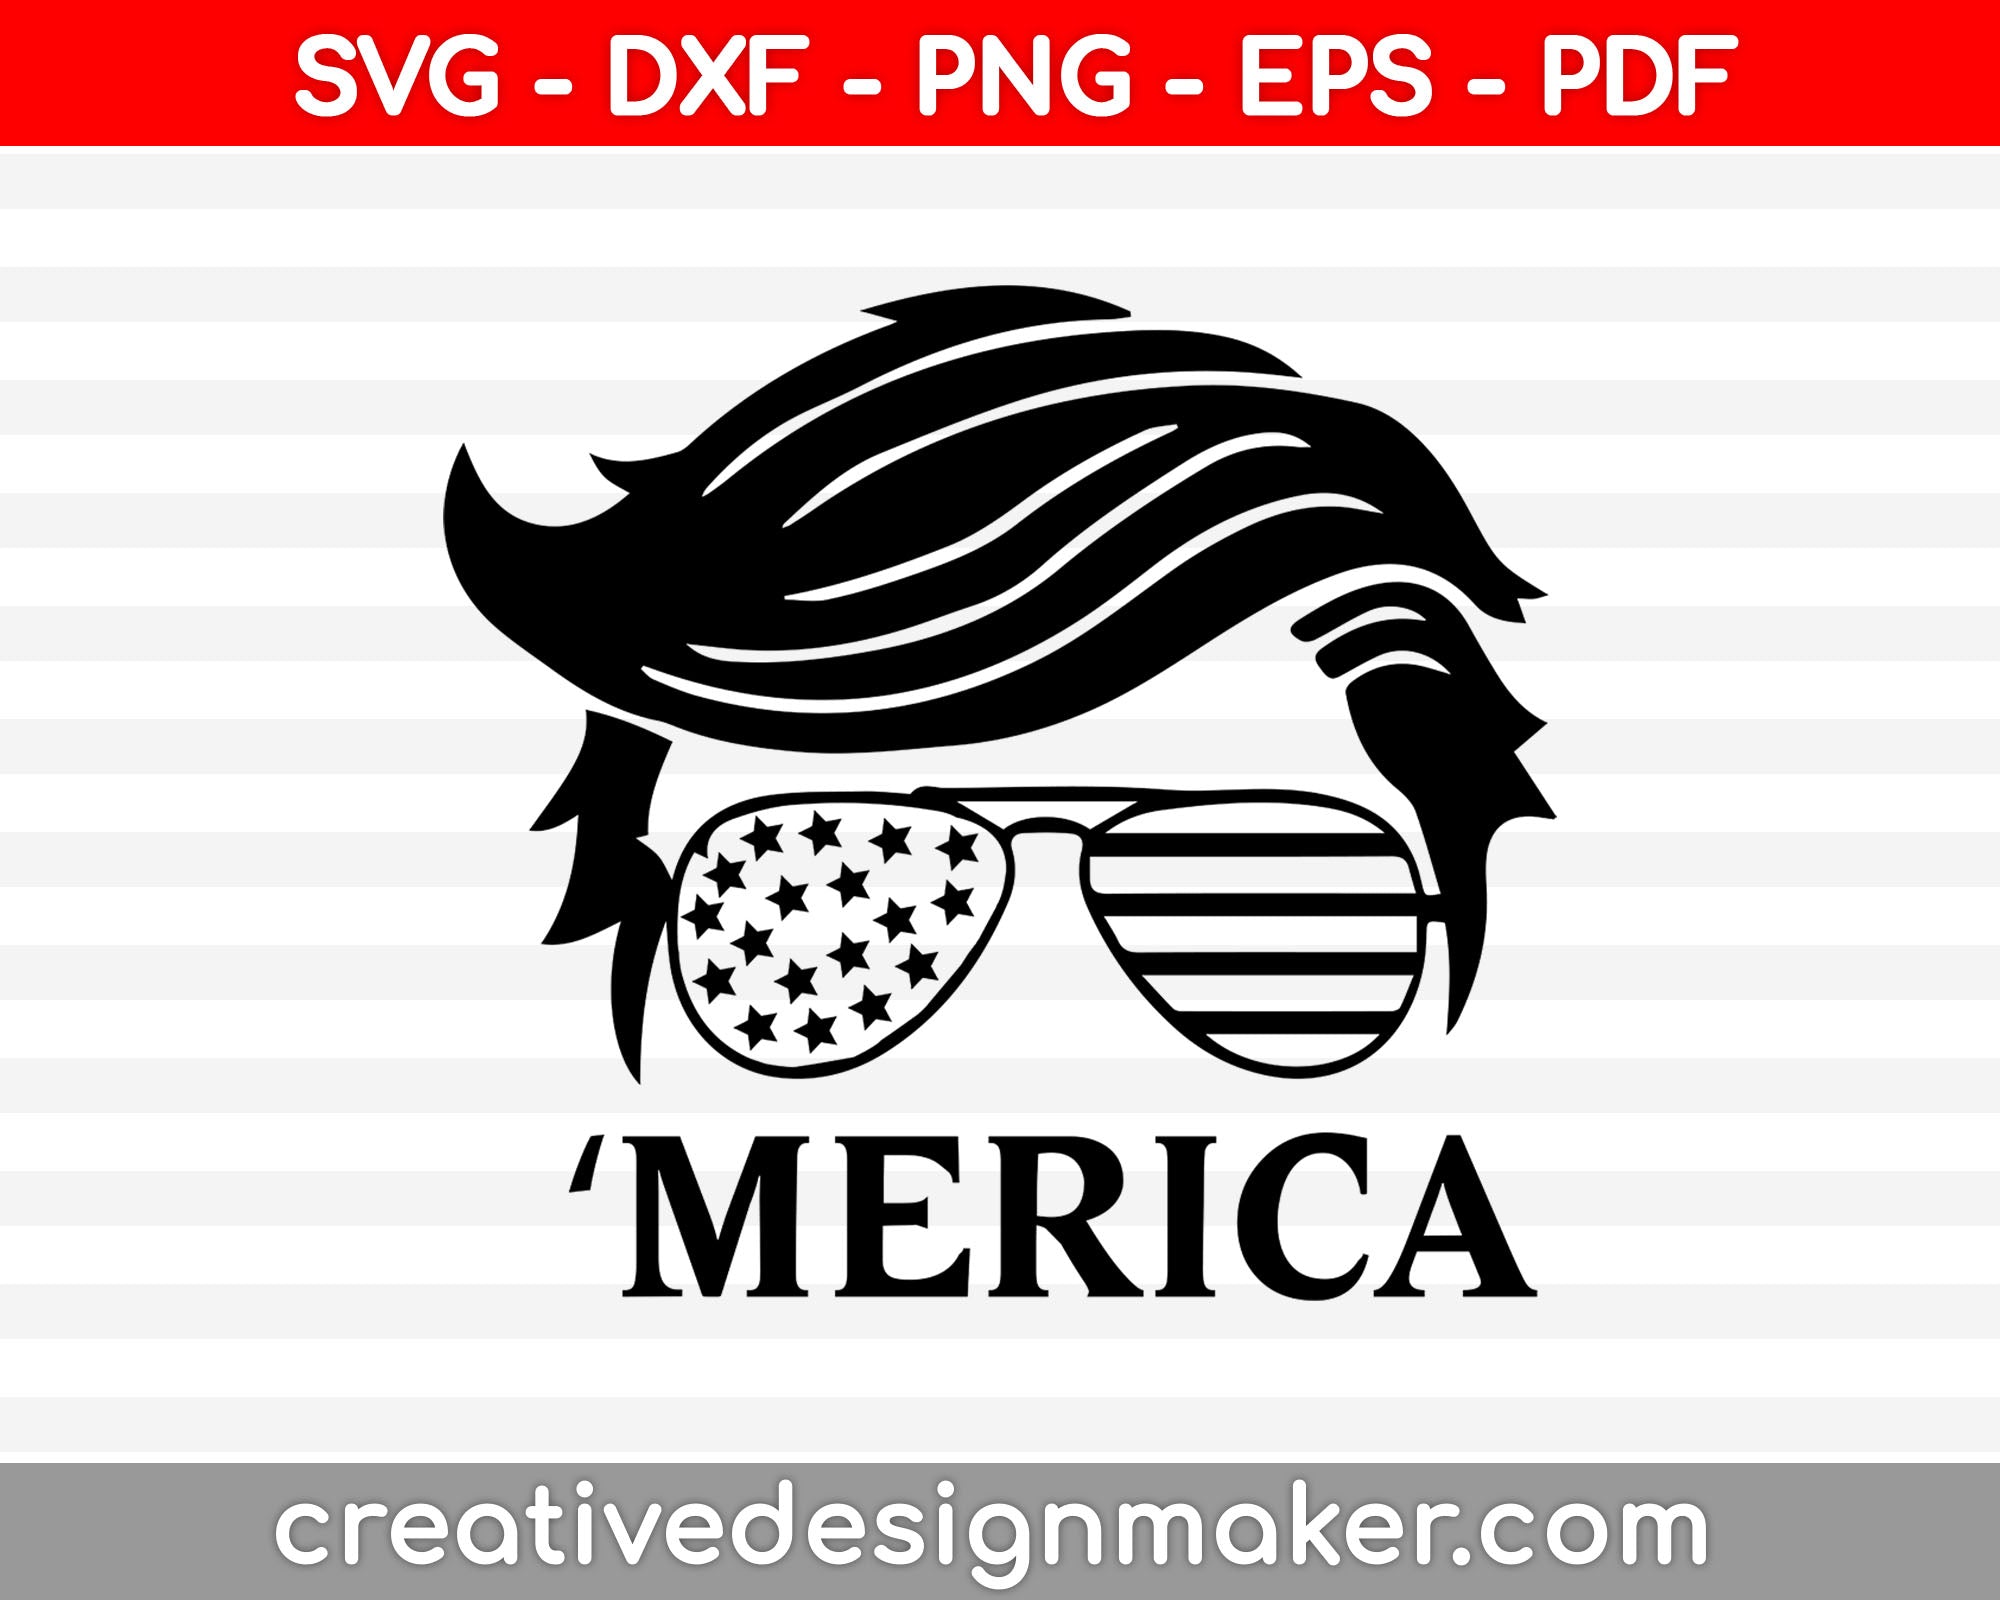 Trump ‘Merica,Trump 2020, Trump Hair Style Sunglasses, American Flag Design, svg dxf png eps pdf File For Cameo And Printable Files